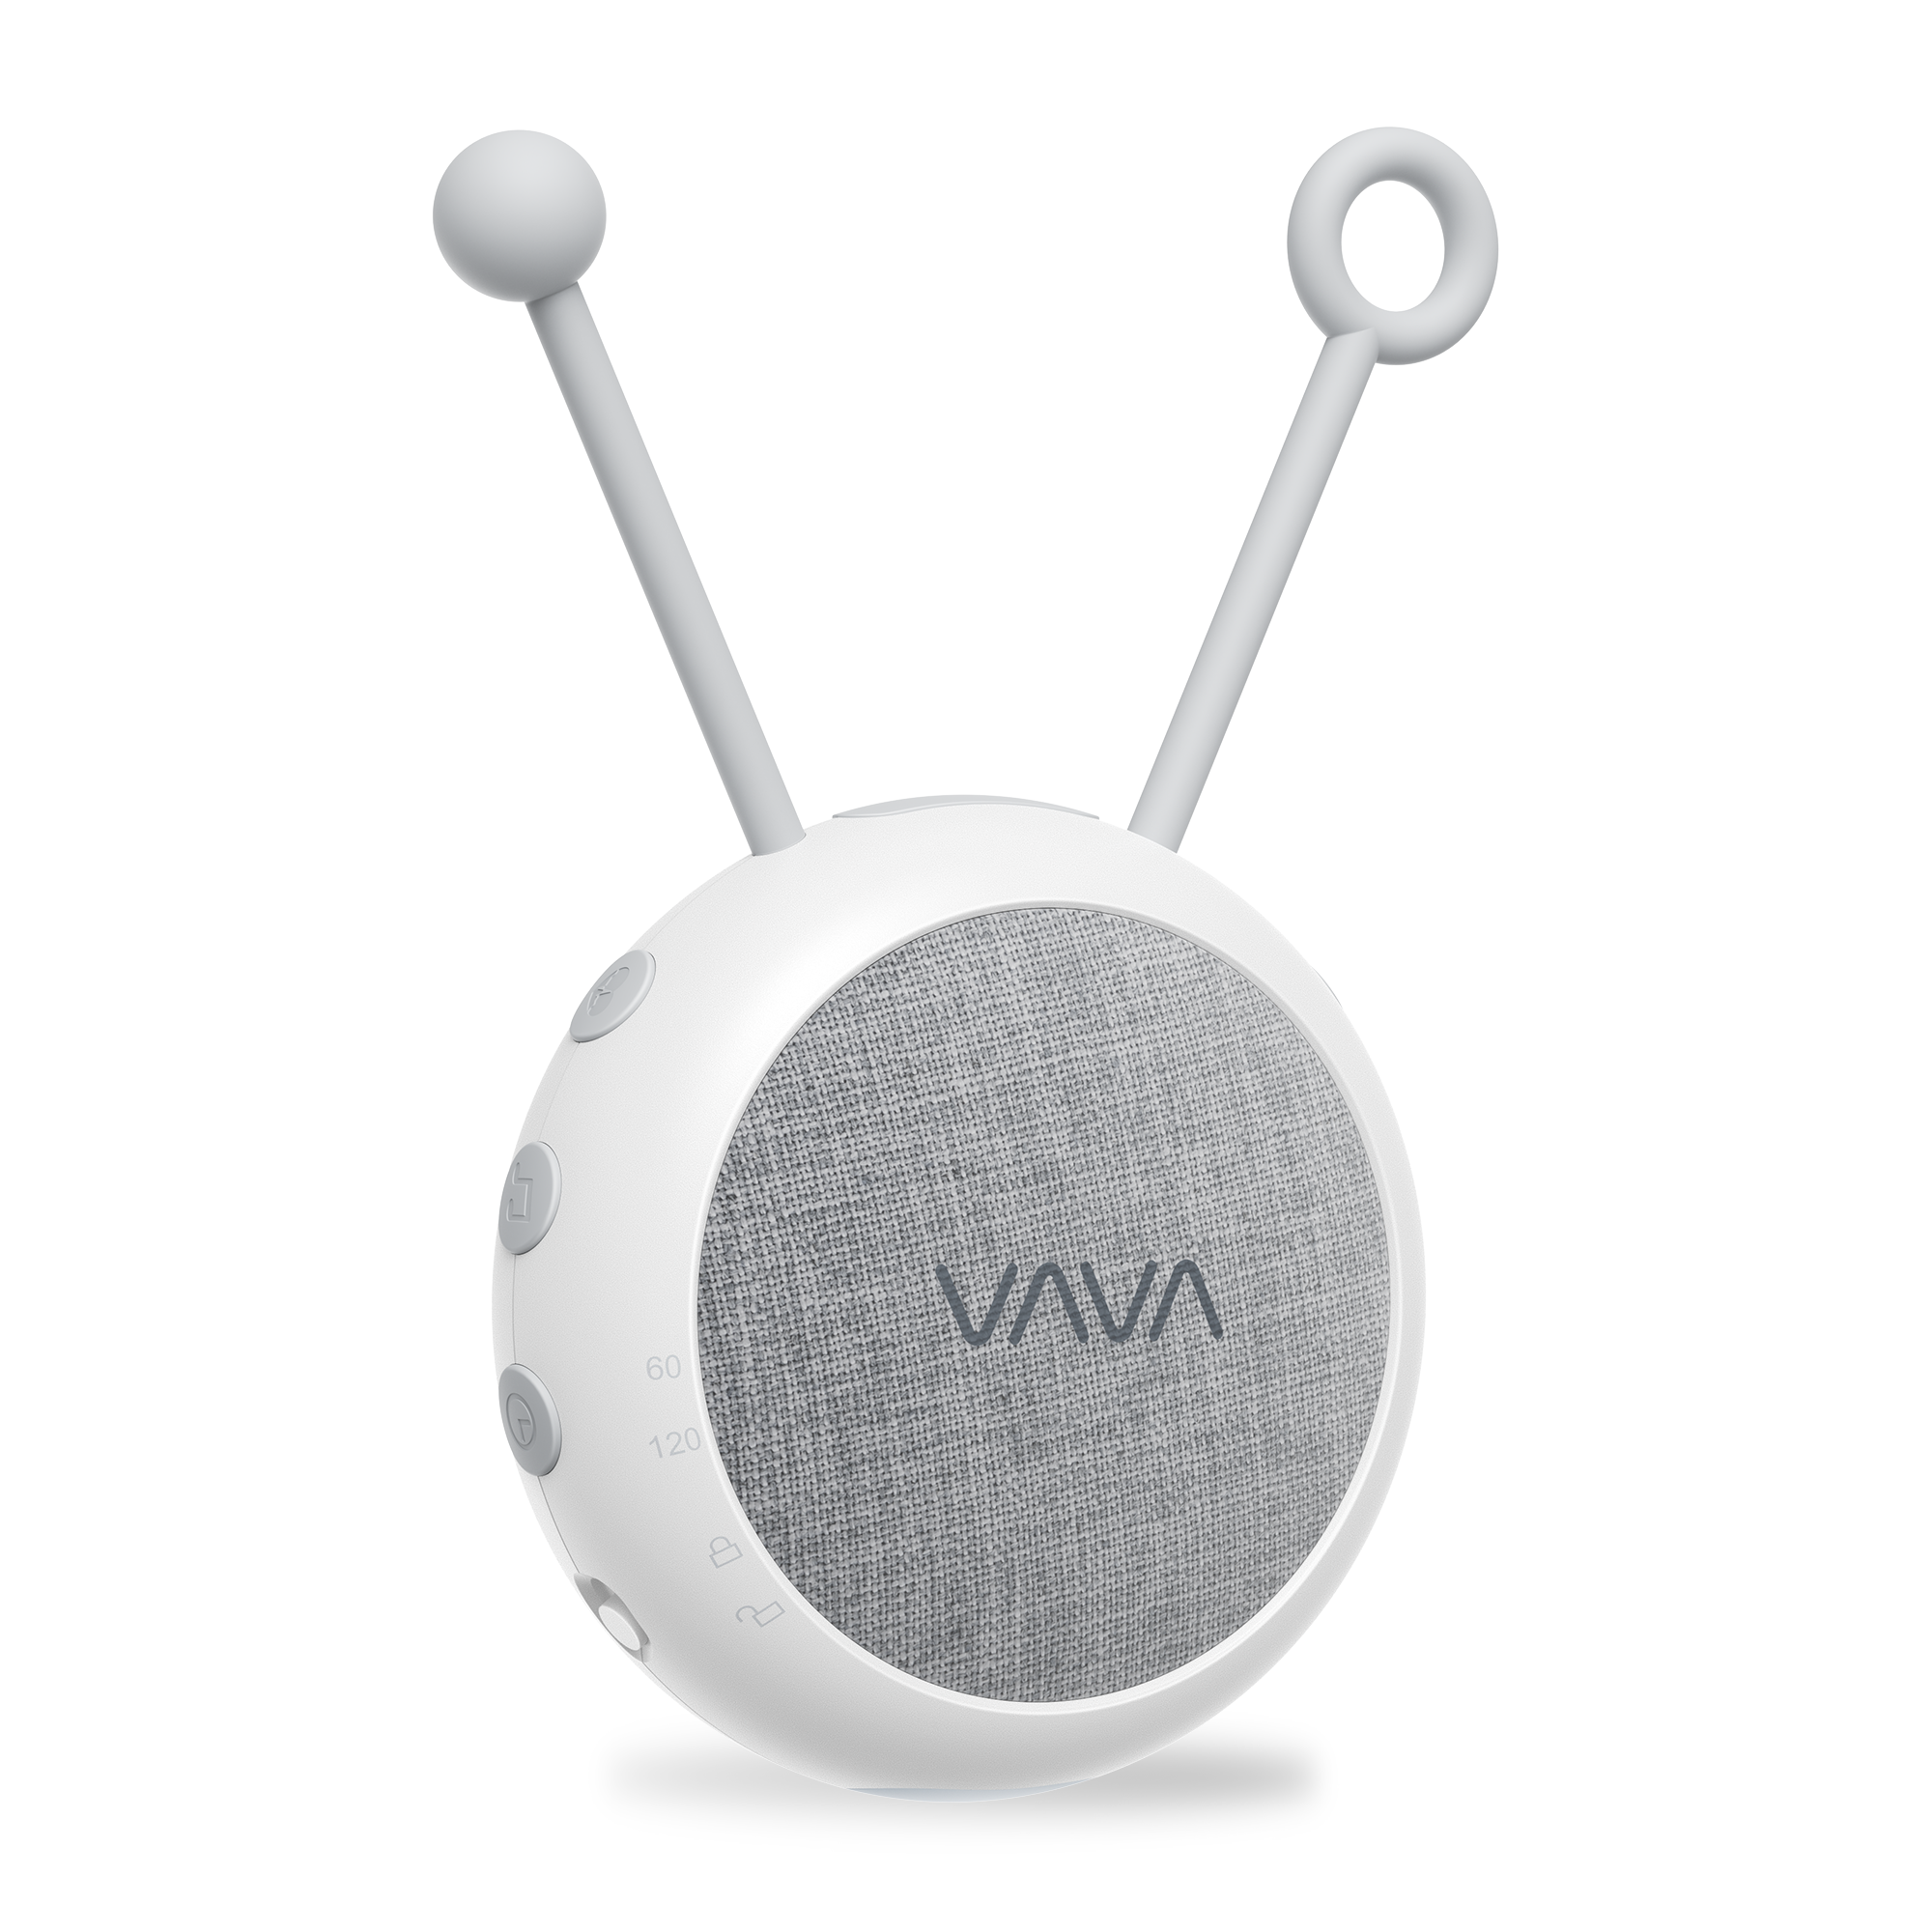 VAVA Twinkle Soother portable baby sound machine and nightlight, side view